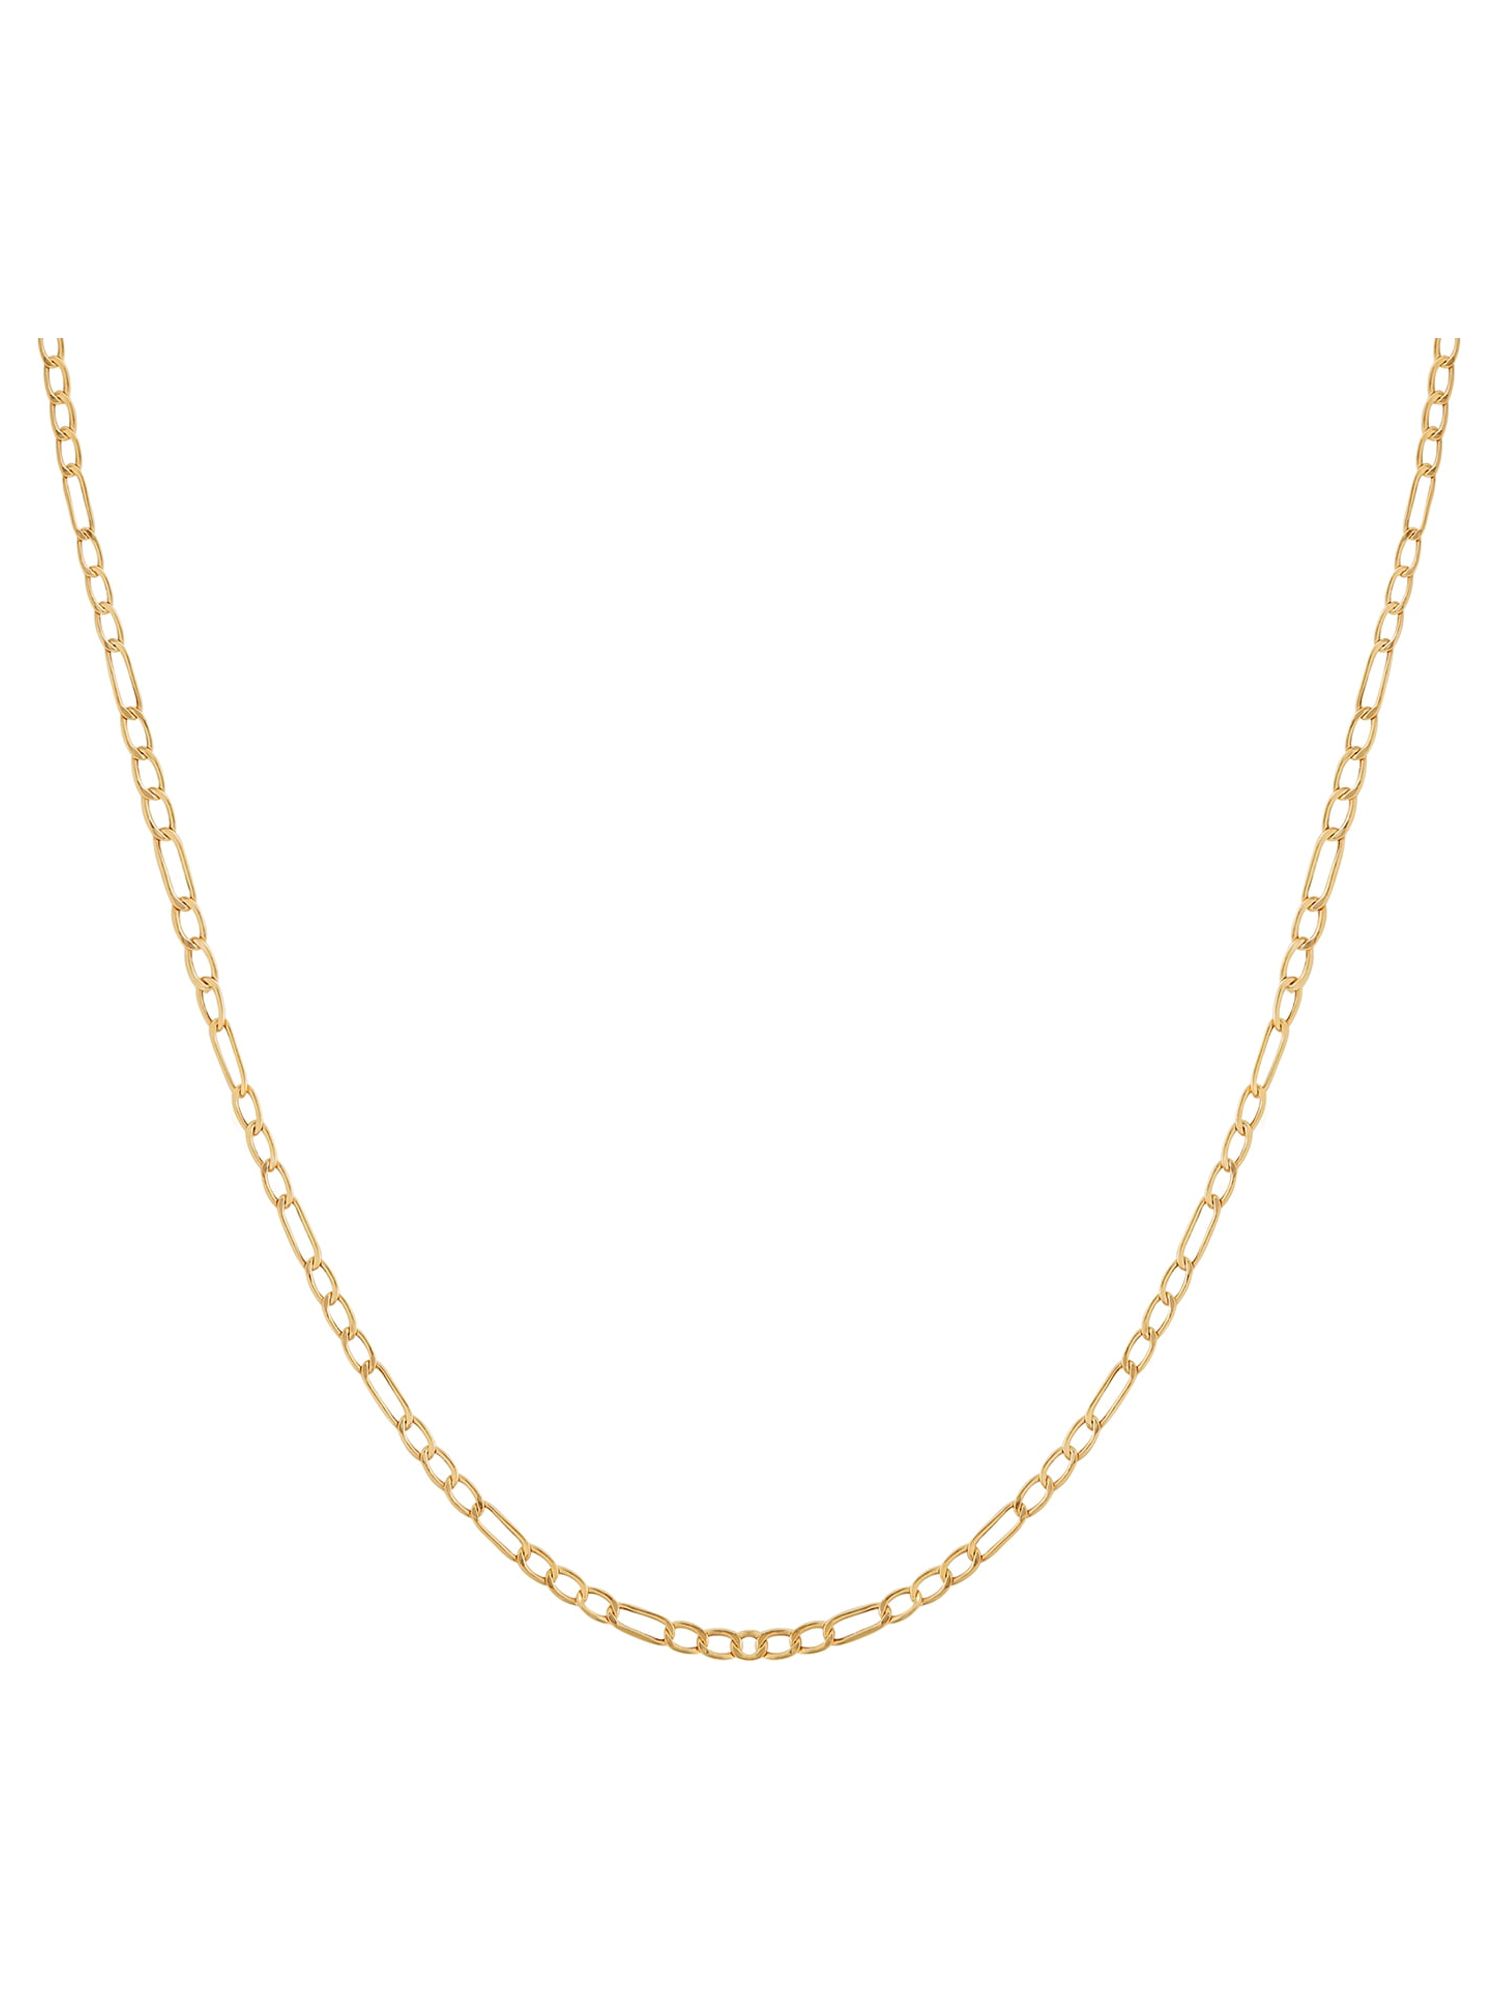 Finecraft 10K Yellow Gold 3.2MM Solid Figaro Link Necklace, 18" - image 1 of 5